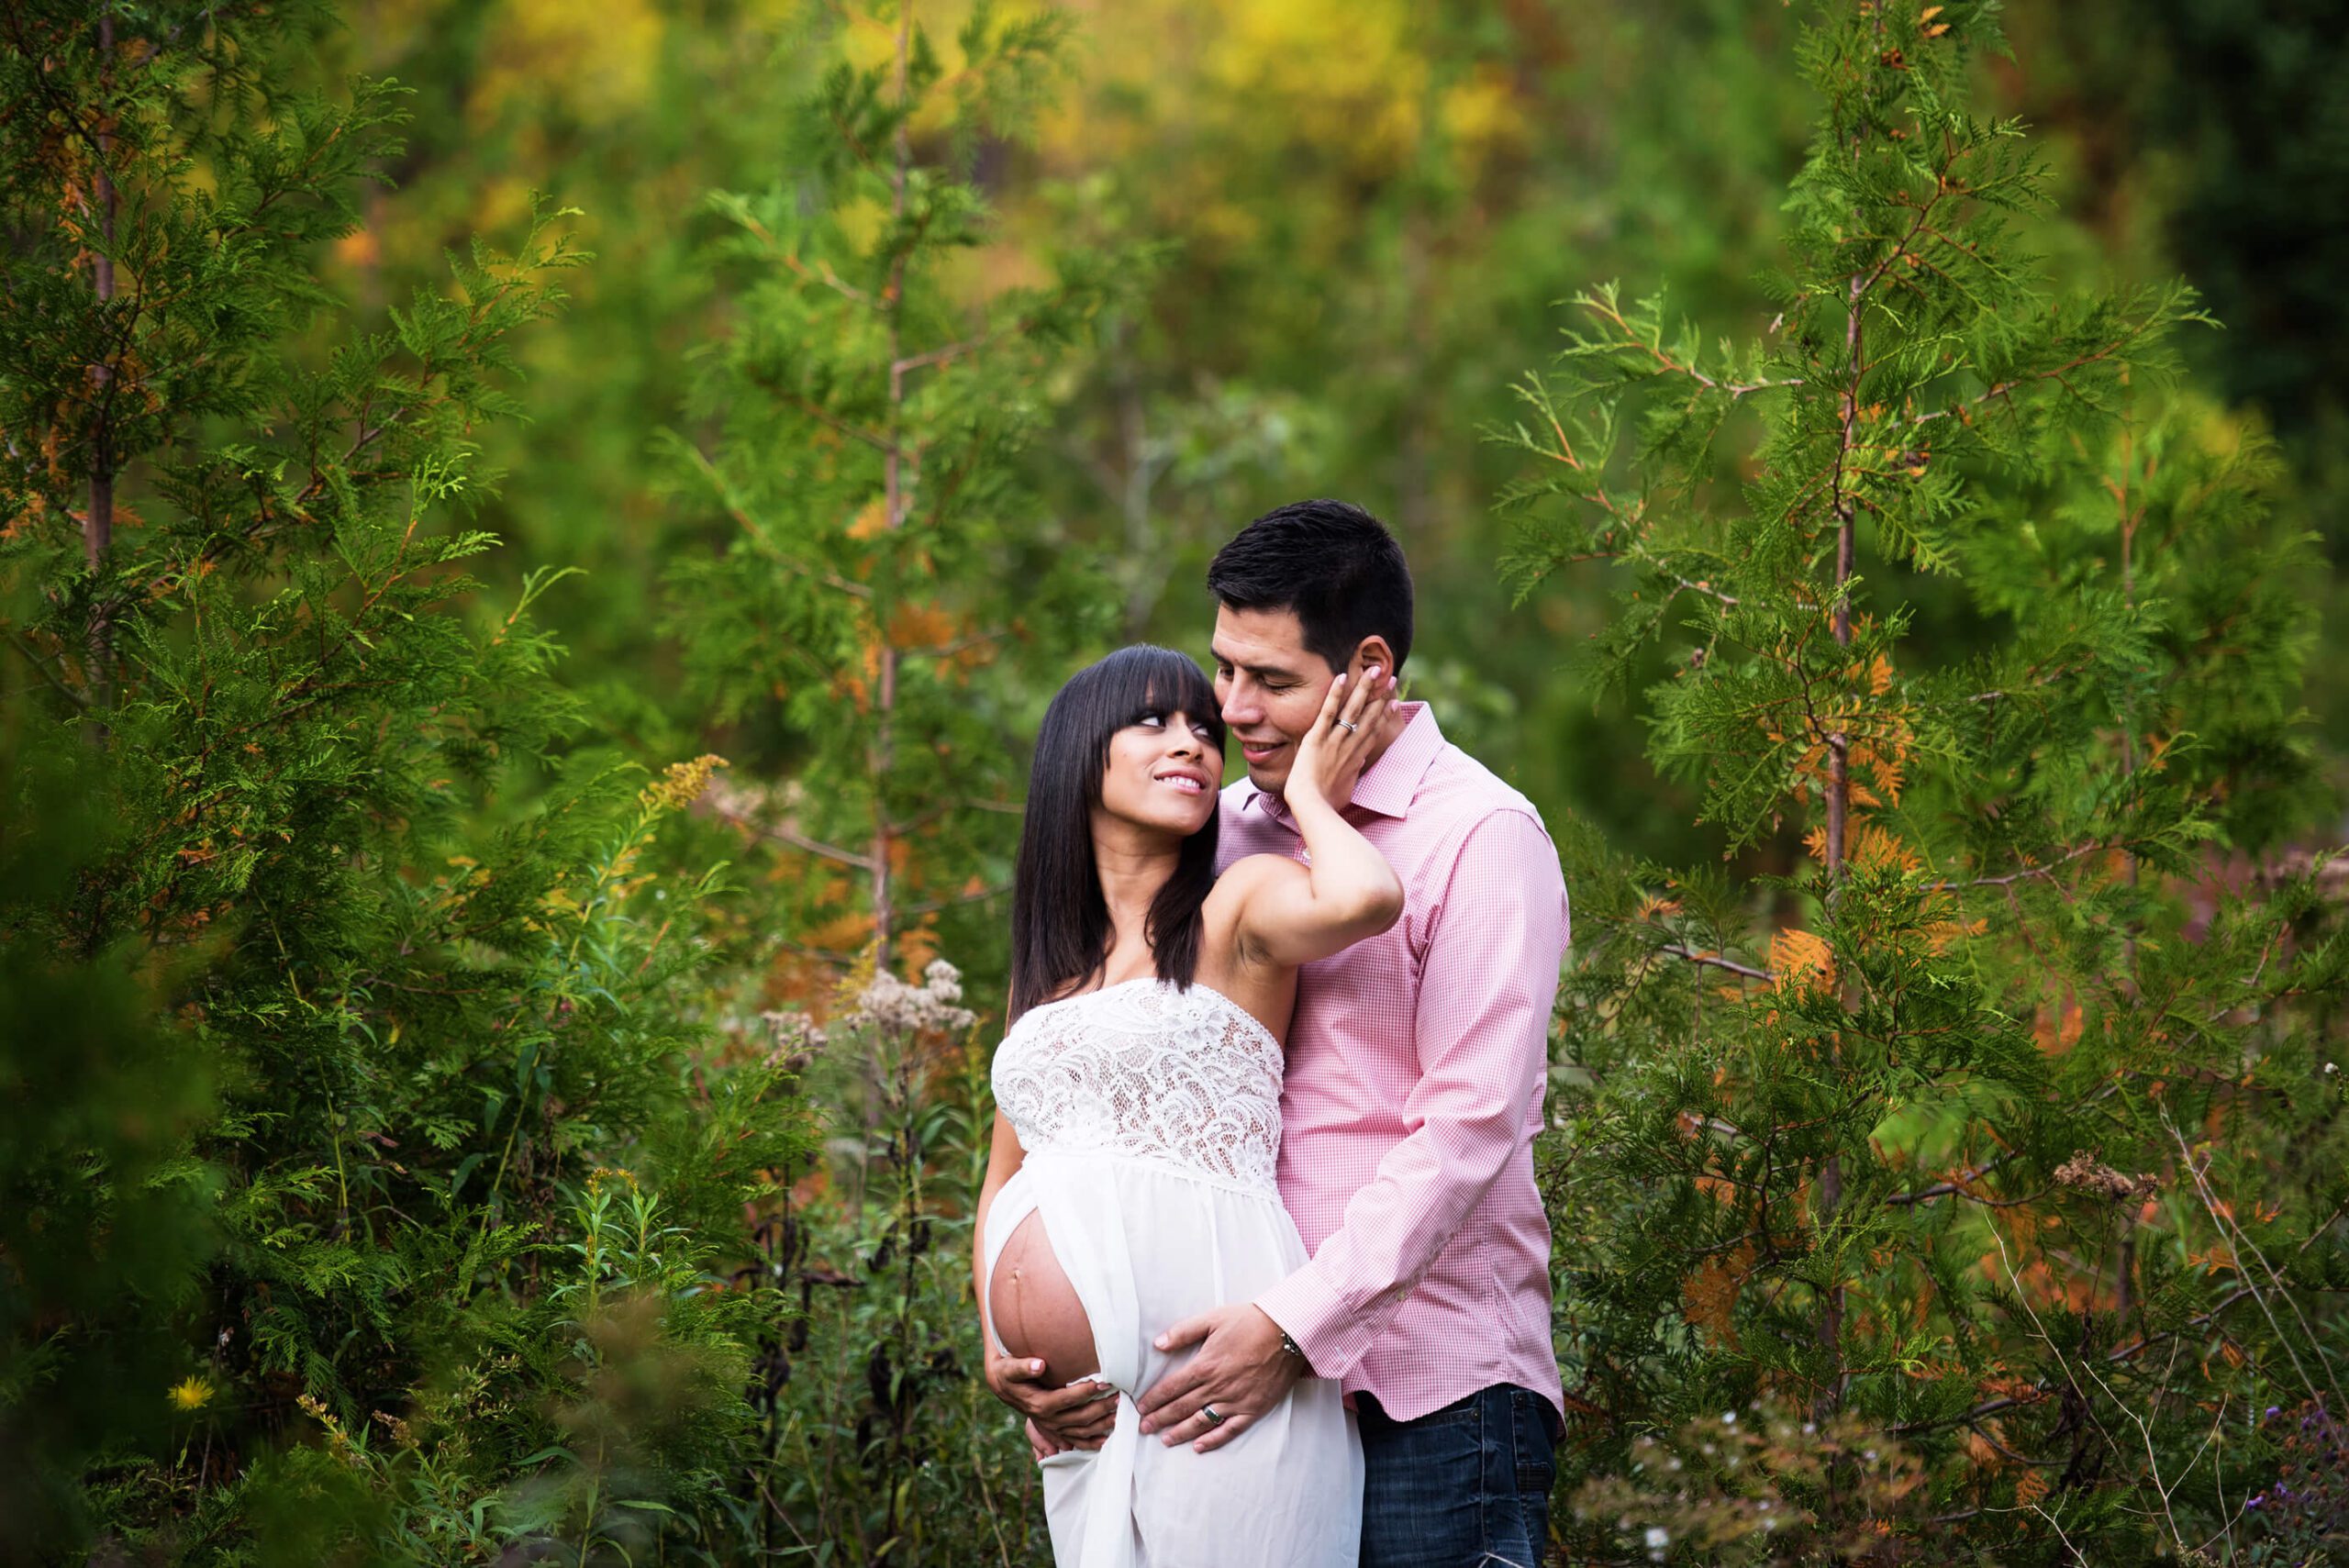 Burlington Newborn Photographer Outdoor Maternity Session in the Woods In Fall With White Maternity Dress